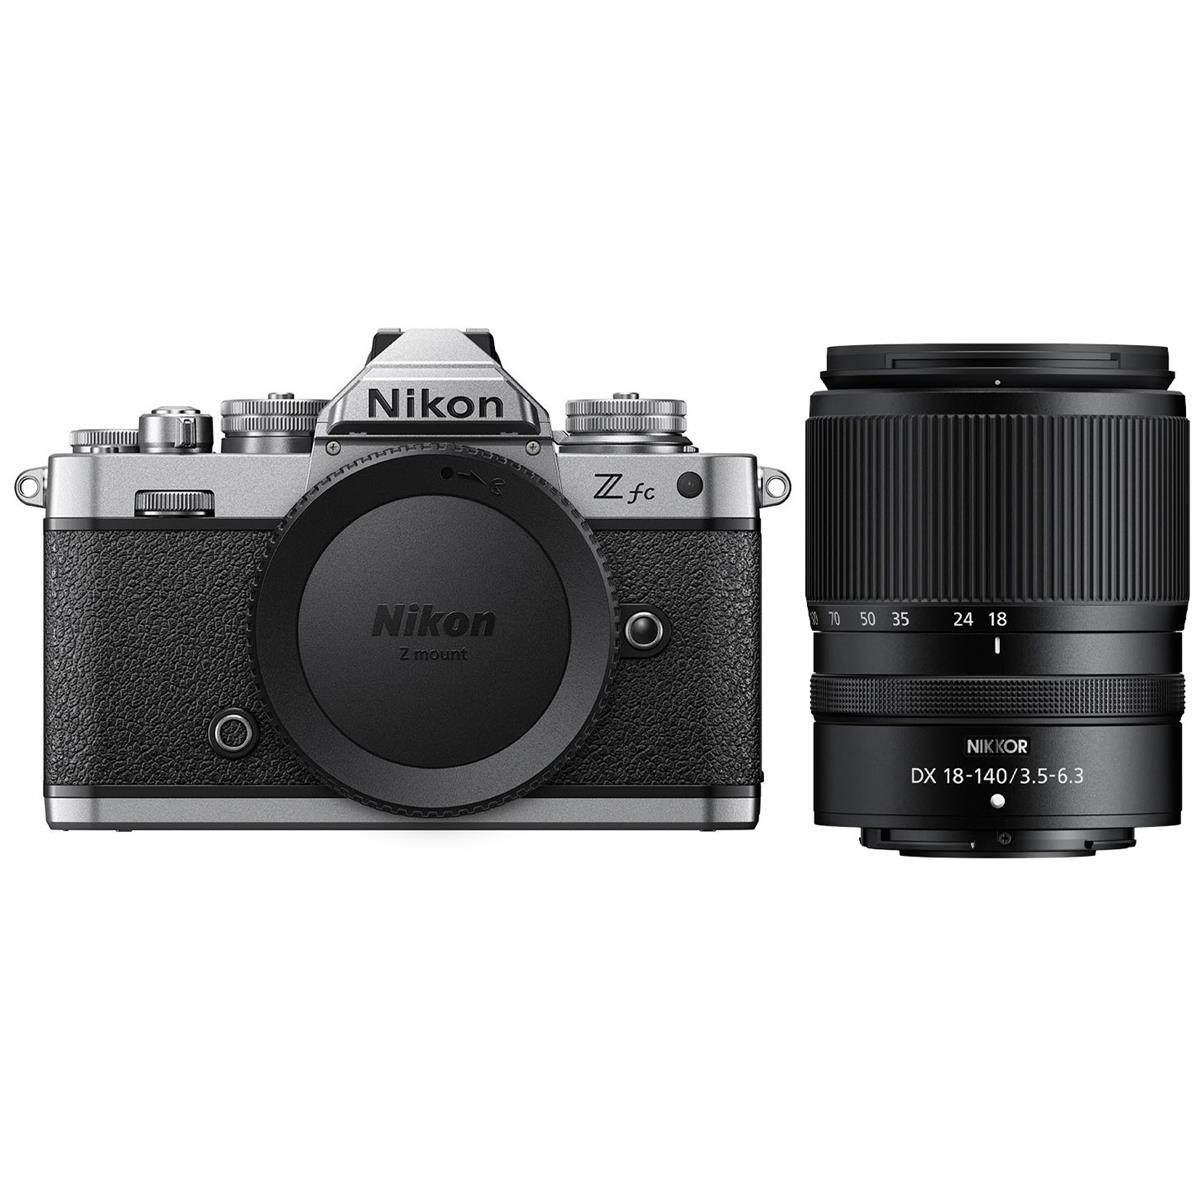 Image of Nikon Z fc DX-Format Mirrorless Camera with 18-140mm f/3.5-6.3 VR Lens